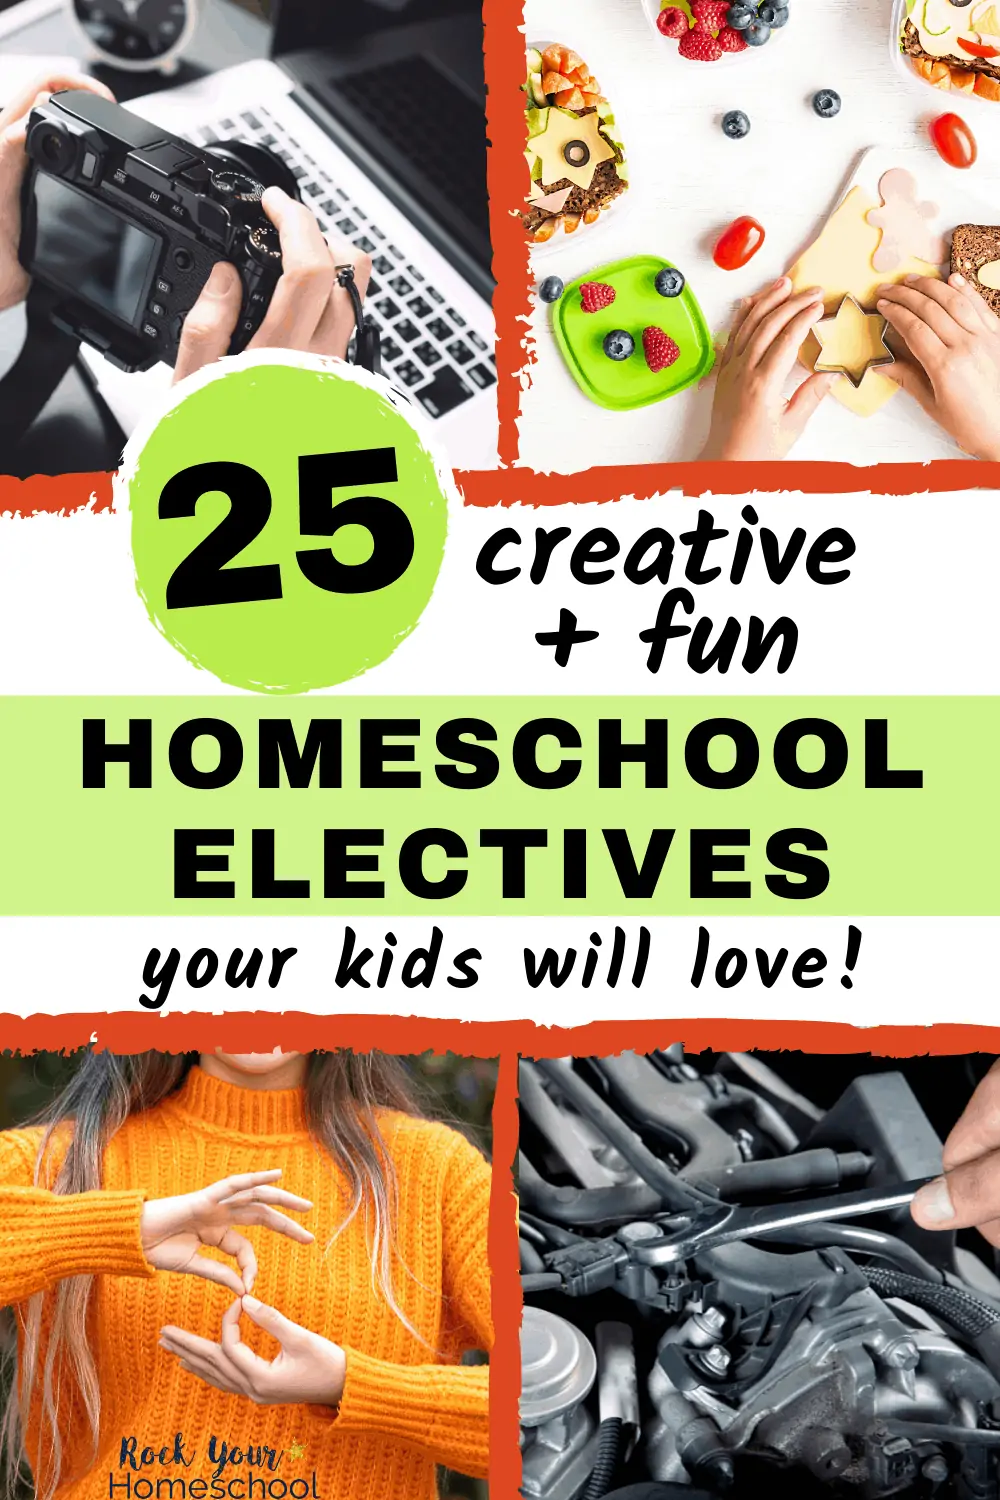 Teen holding camera with laptop in background, kids making snacks, teenage girl doing sign language, and teenage boy working on car motor to feature how you can use these 25 creative and fun homeschool elective ideas to boost learning at home